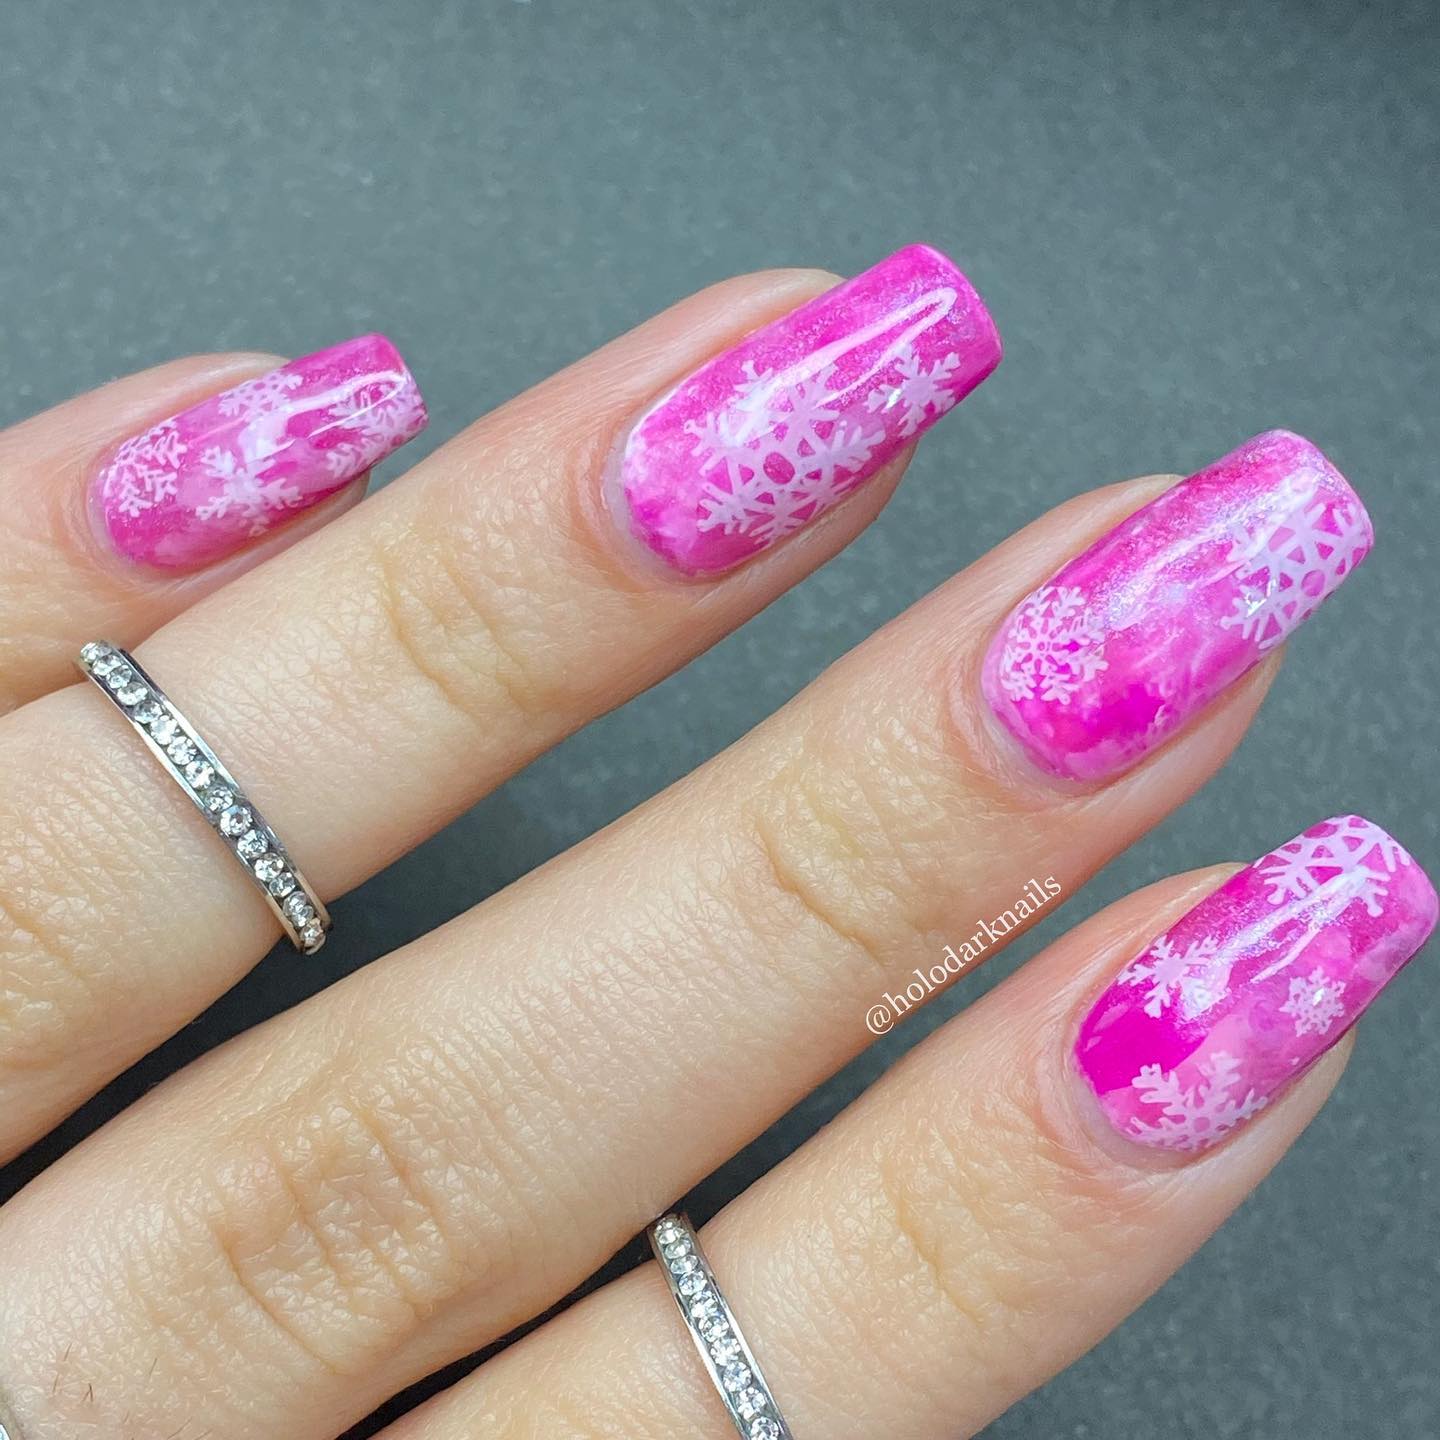 Different shapes of snowflakes on pink nails look amazing. You should combine this color with snowflakes!